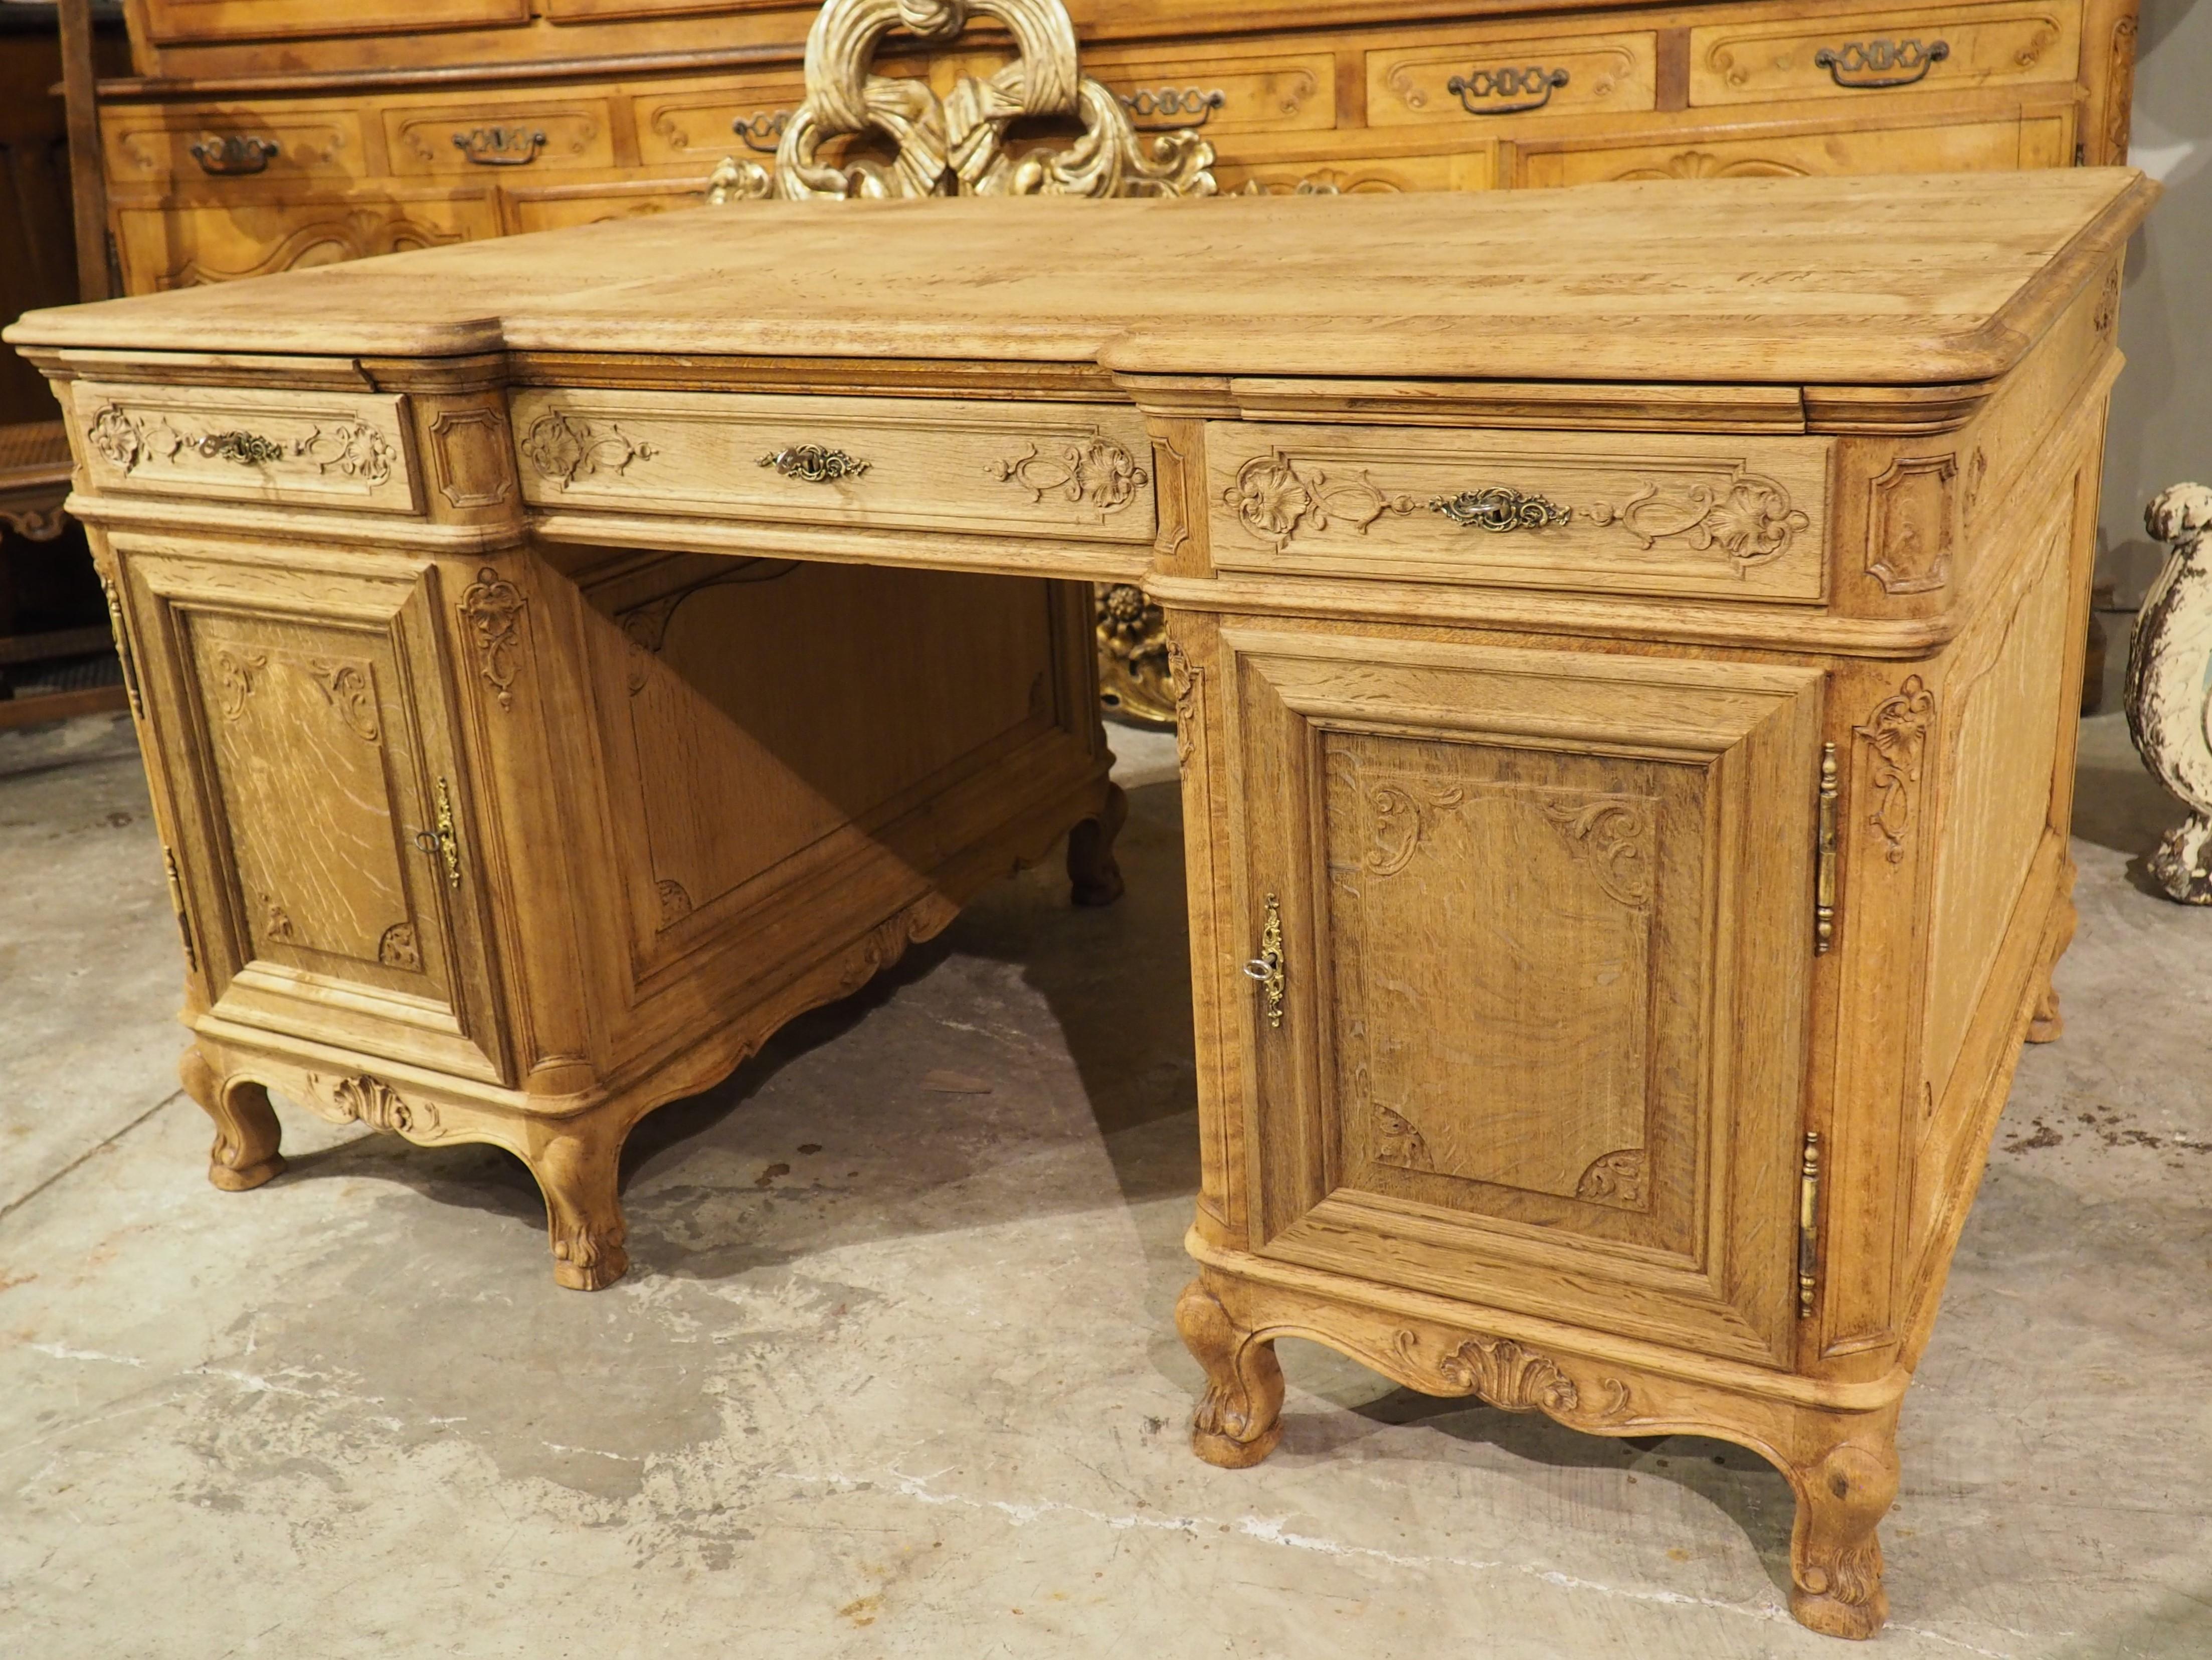 As a transitional age in French history, the Regence period is known for furniture that showcases forms of the preceding period (Louis XIV), as well as early Louis XV stylings. In the case of this bleached oak partner’s desk, the motifs are